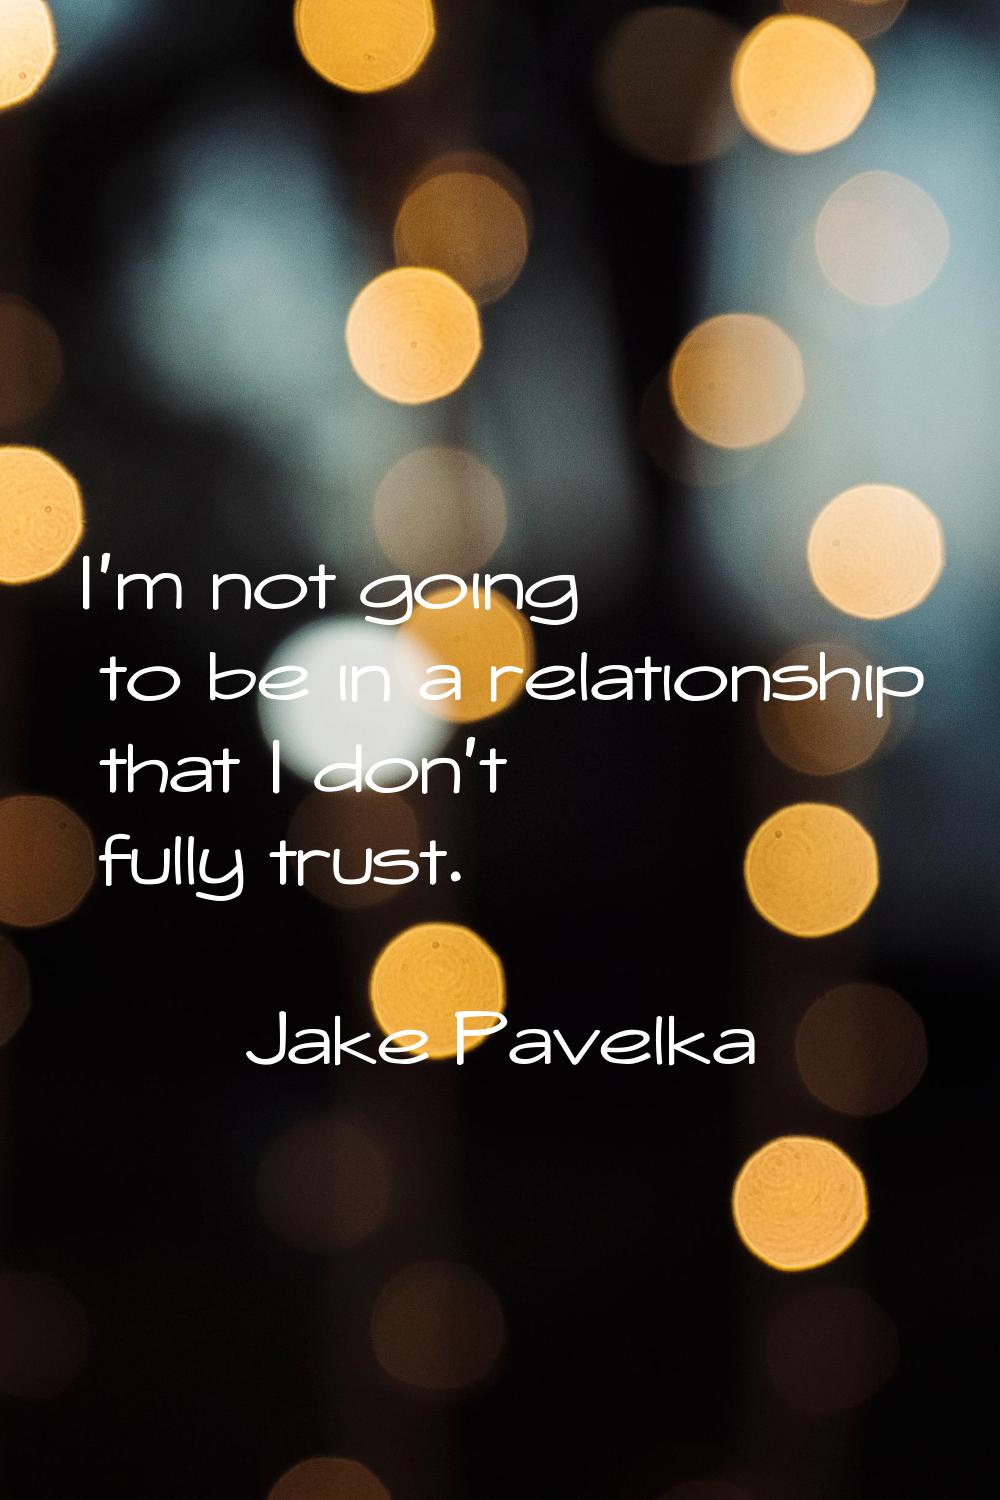 I'm not going to be in a relationship that I don't fully trust.